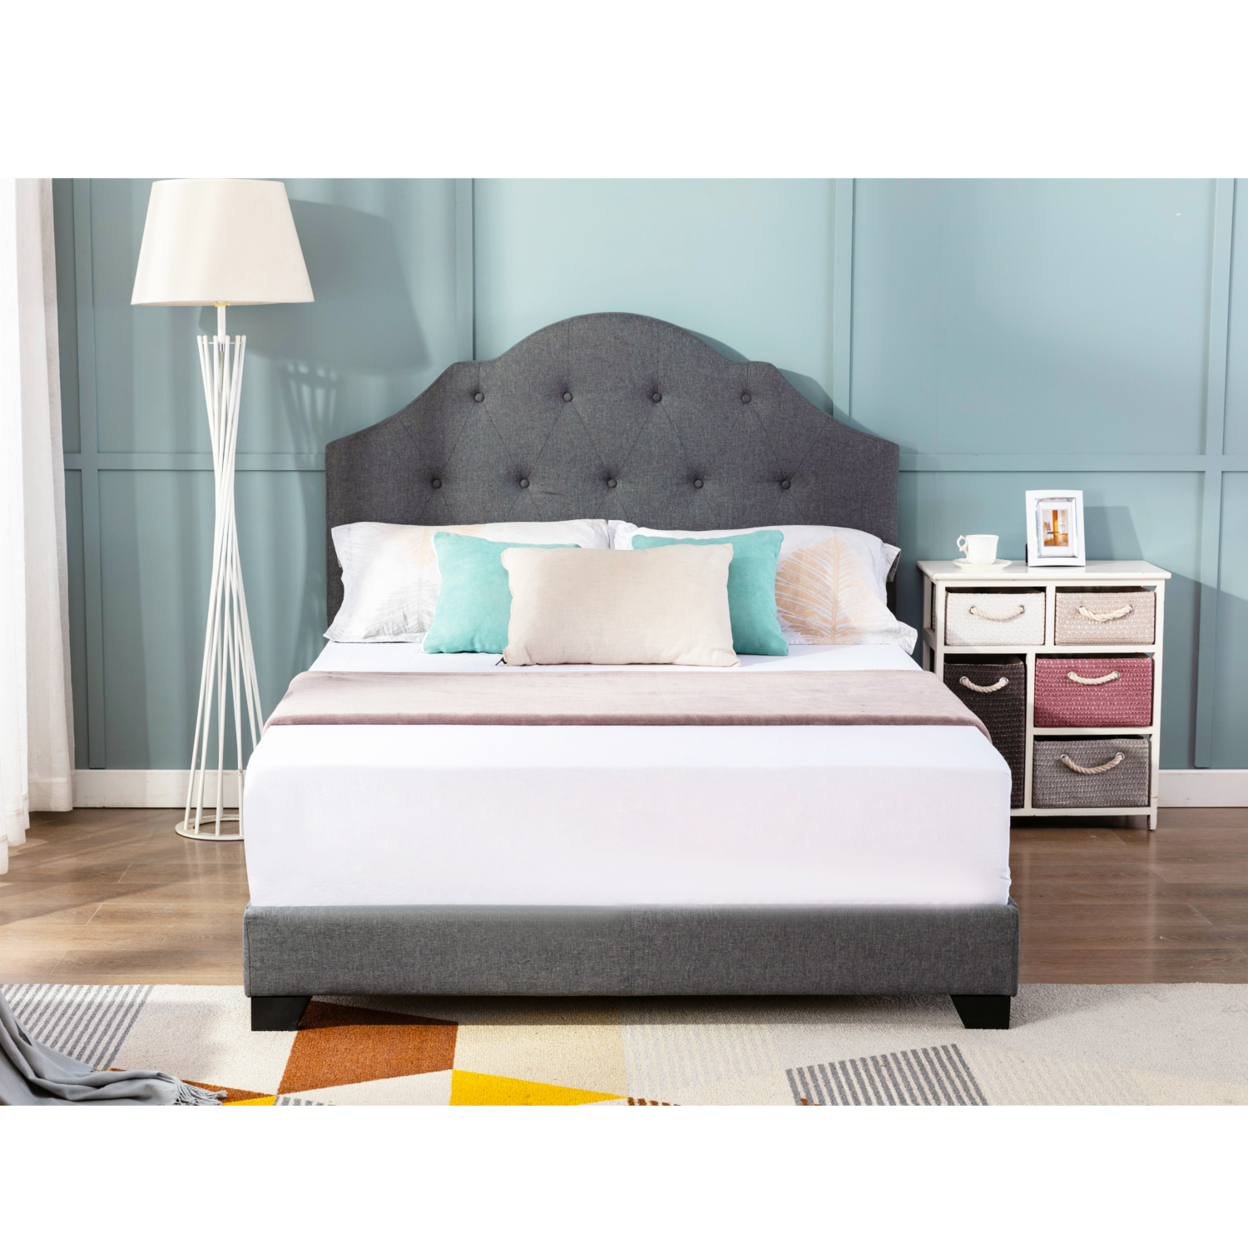 Soild Wood Upholstered Low Profile Platform Bed Fram/Mattress Base With Button Tufted Adjustable Height Headboard DOUBLE SIZE